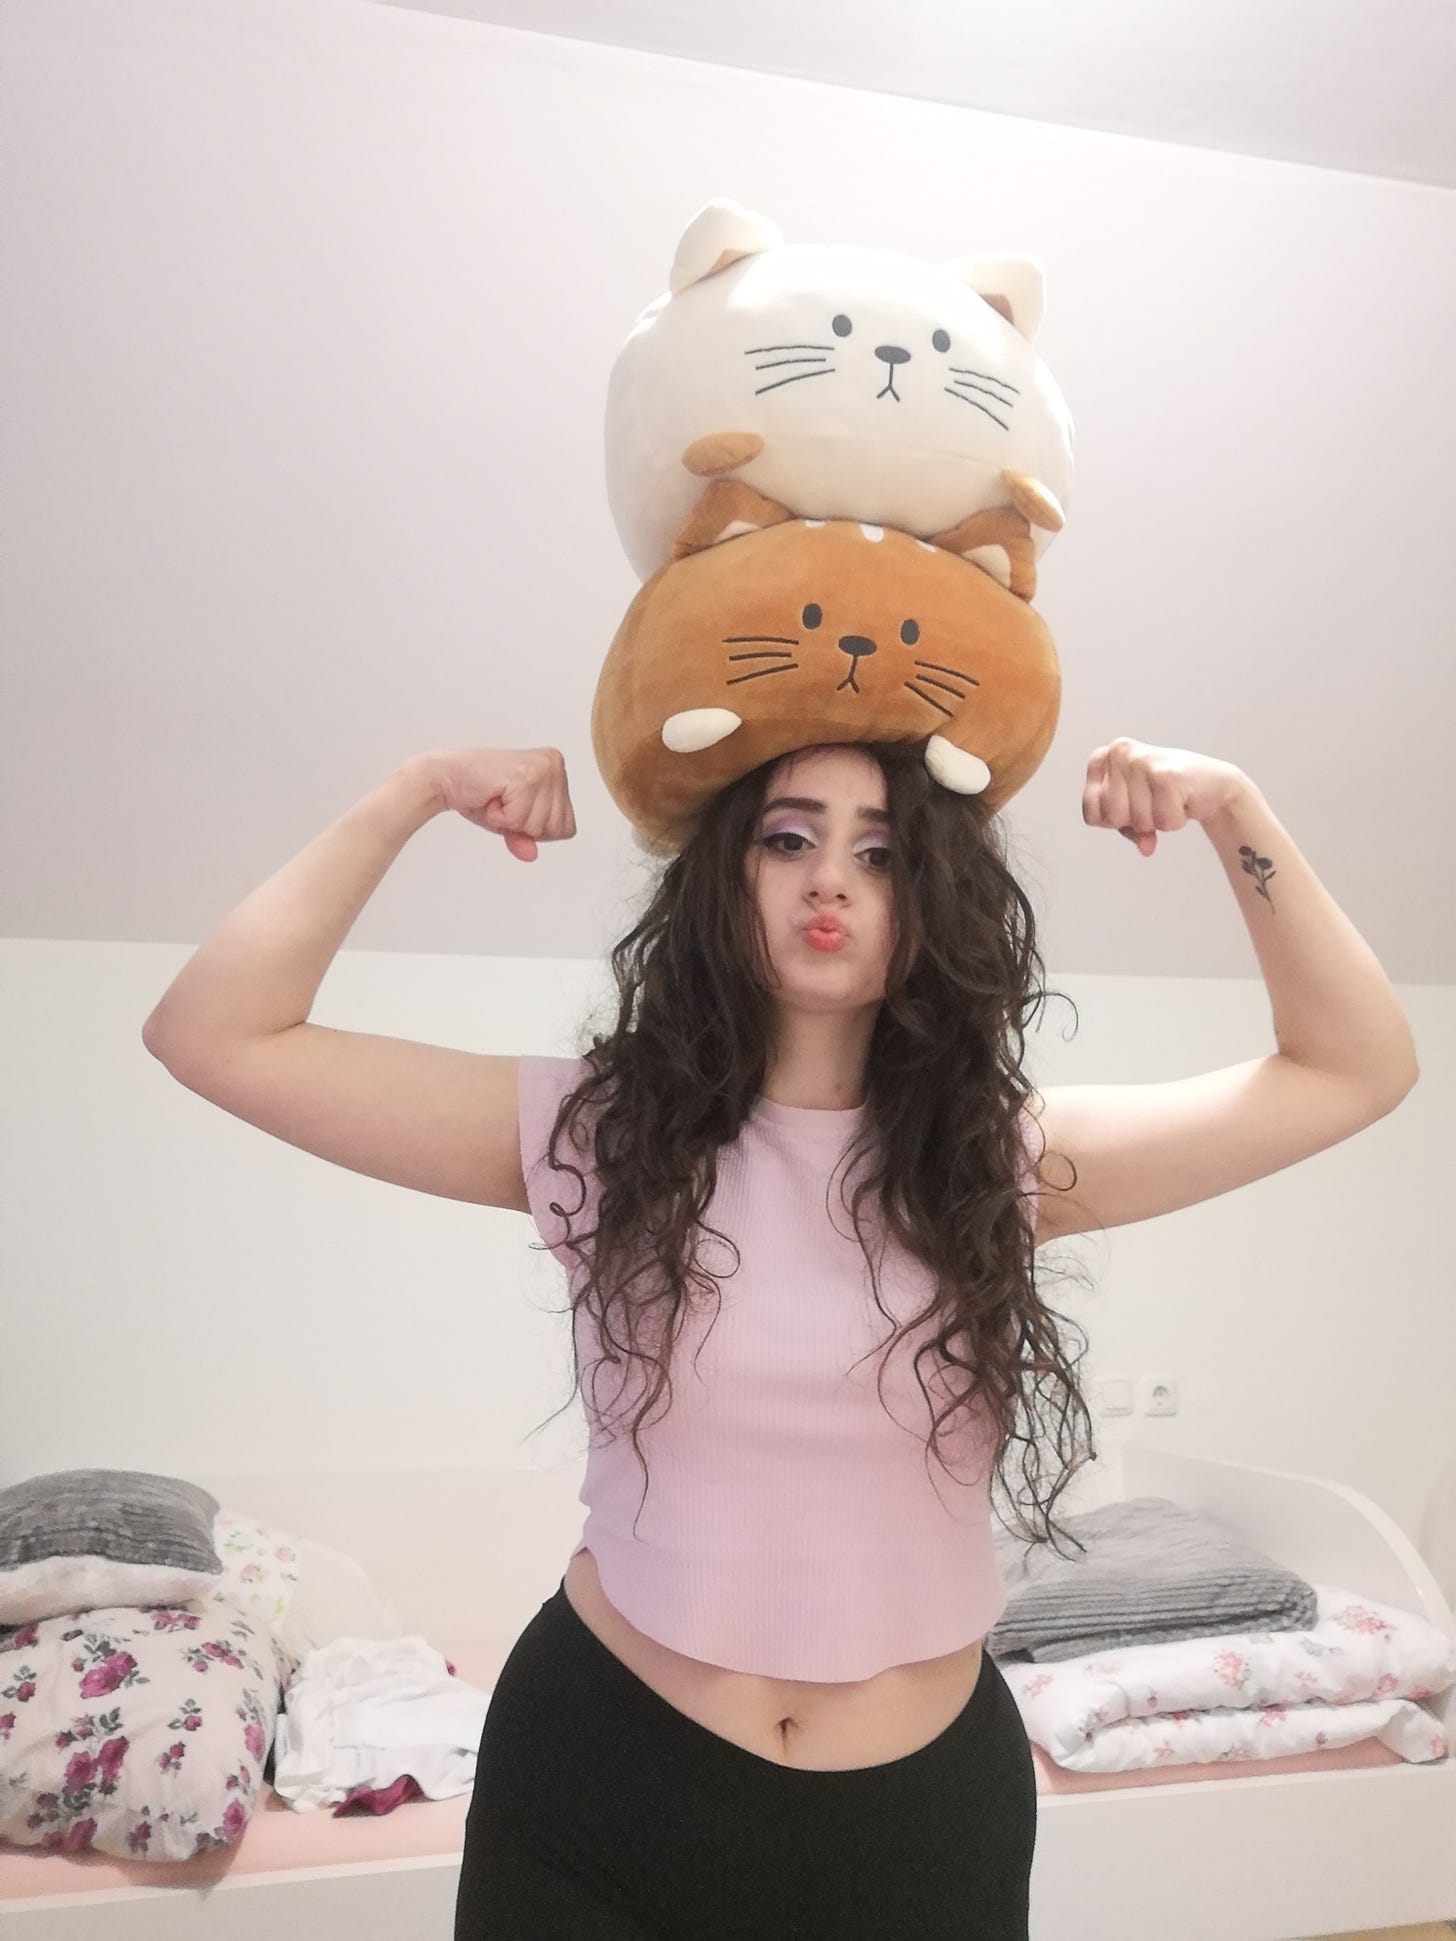 Matea, a girl with dark-brown, bust-length hair, puckering her lips and flexing her arms while balancing two cat plushies on her head